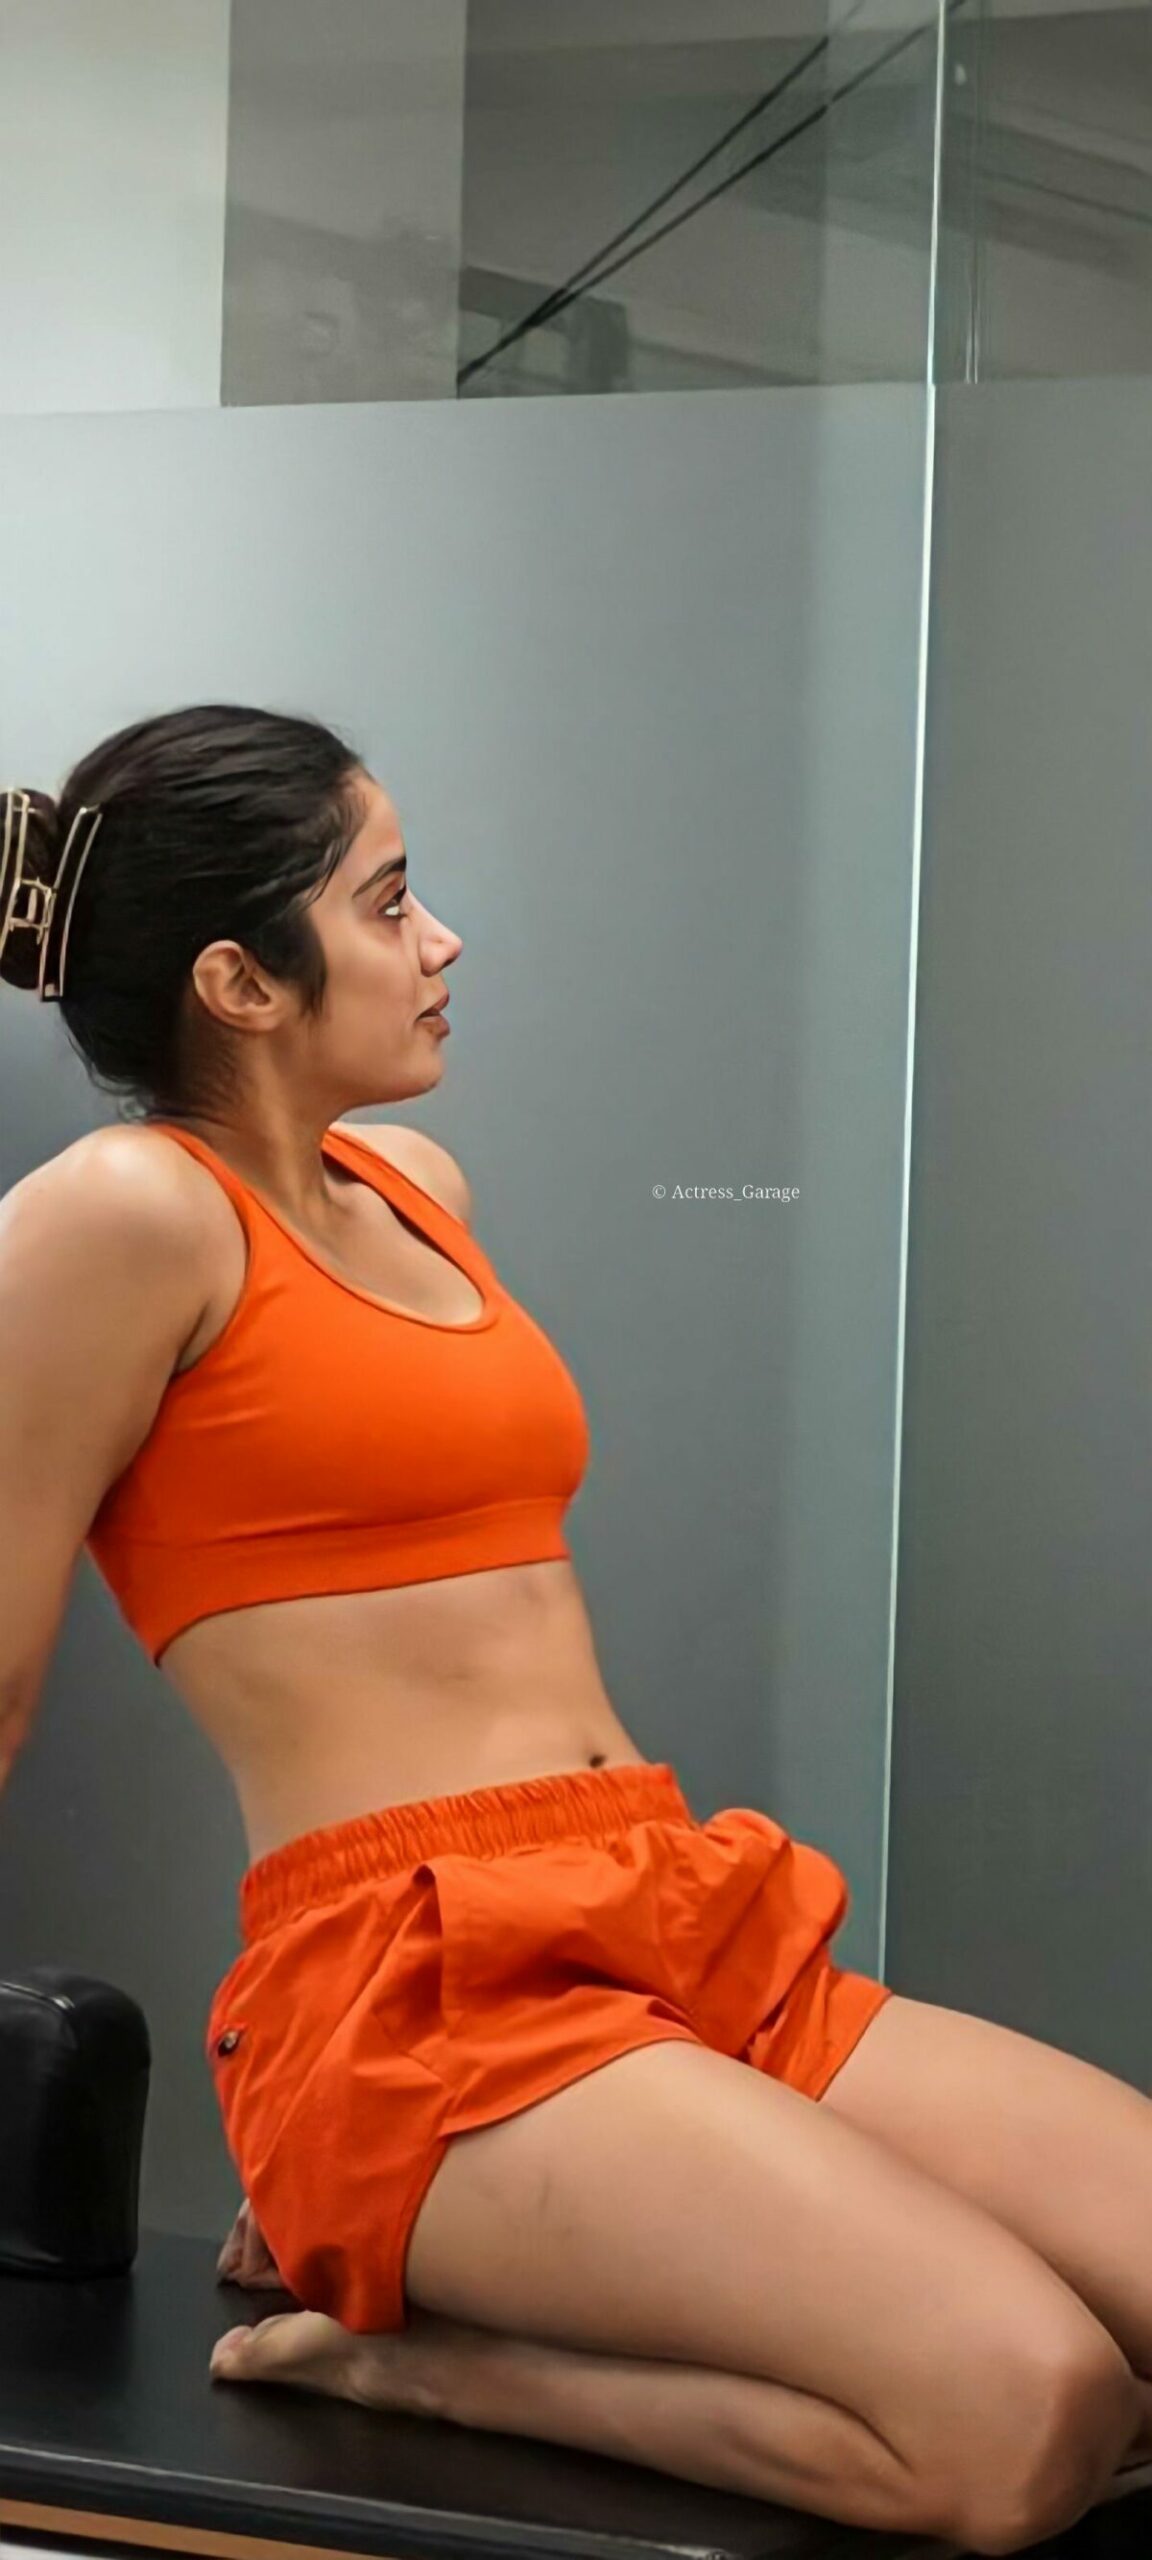 Pic Talk: Janhvi Kapoor Sweating In The Gym